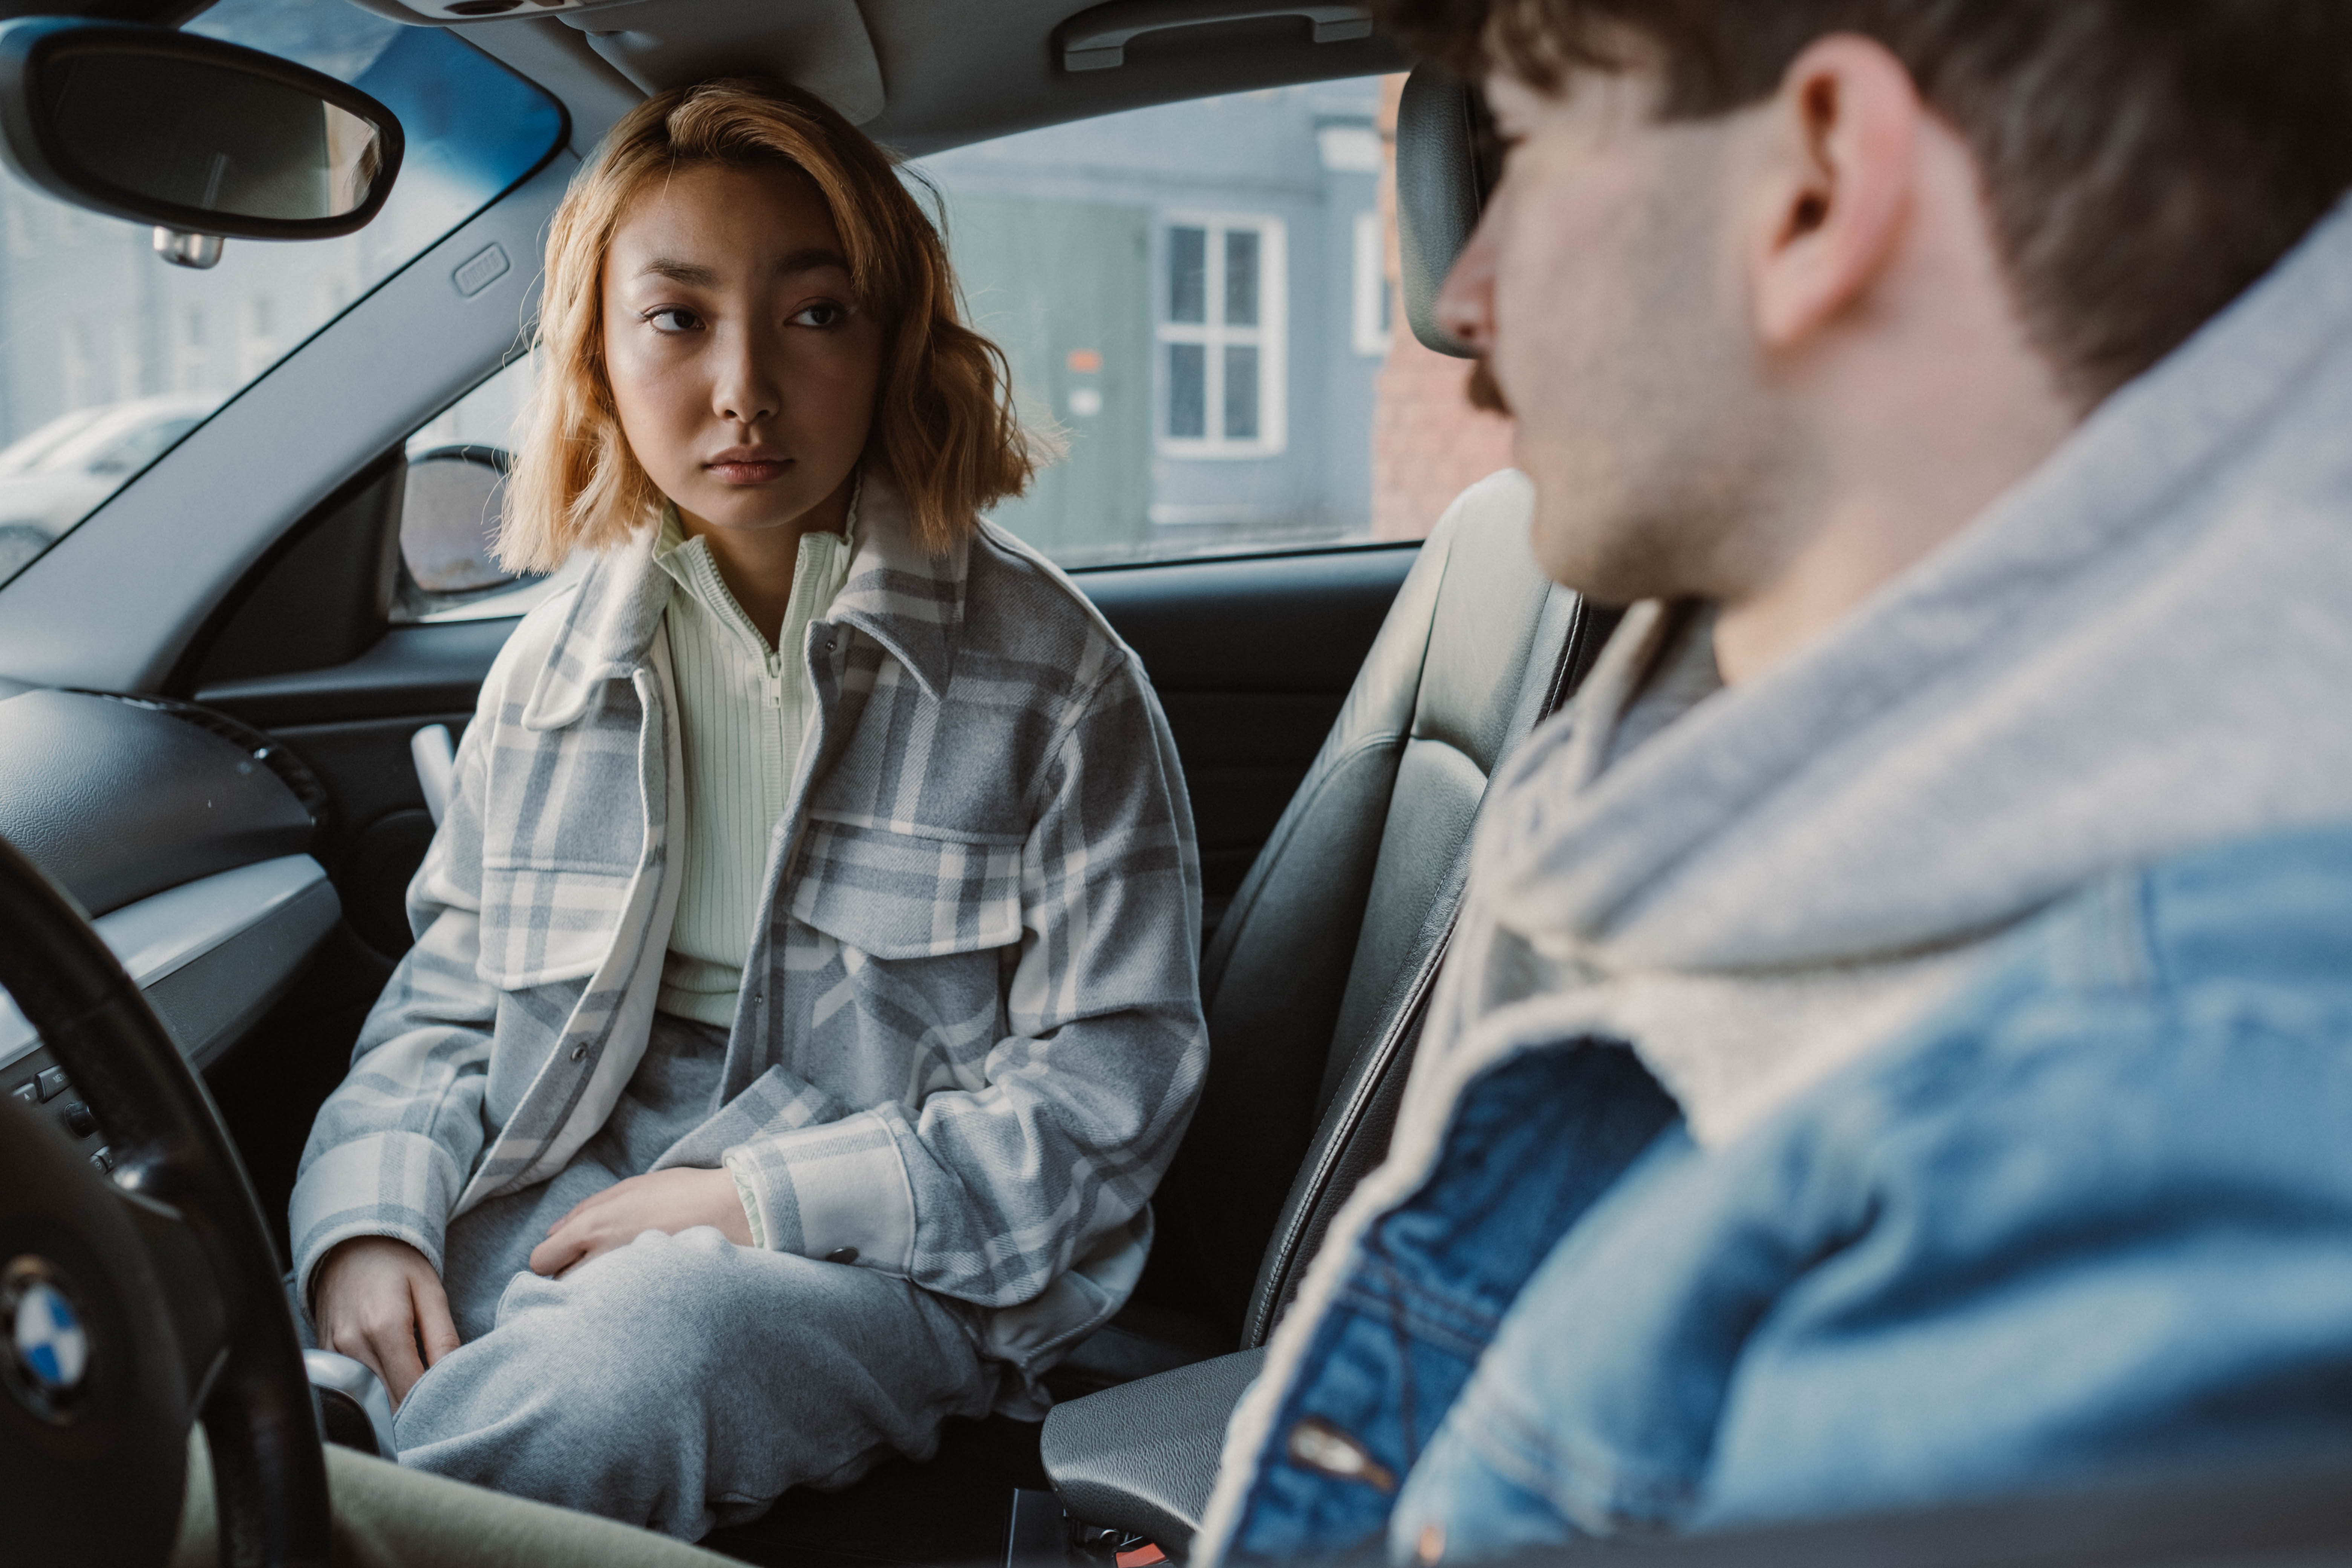 A couple sitting in the car | Source: Pexels